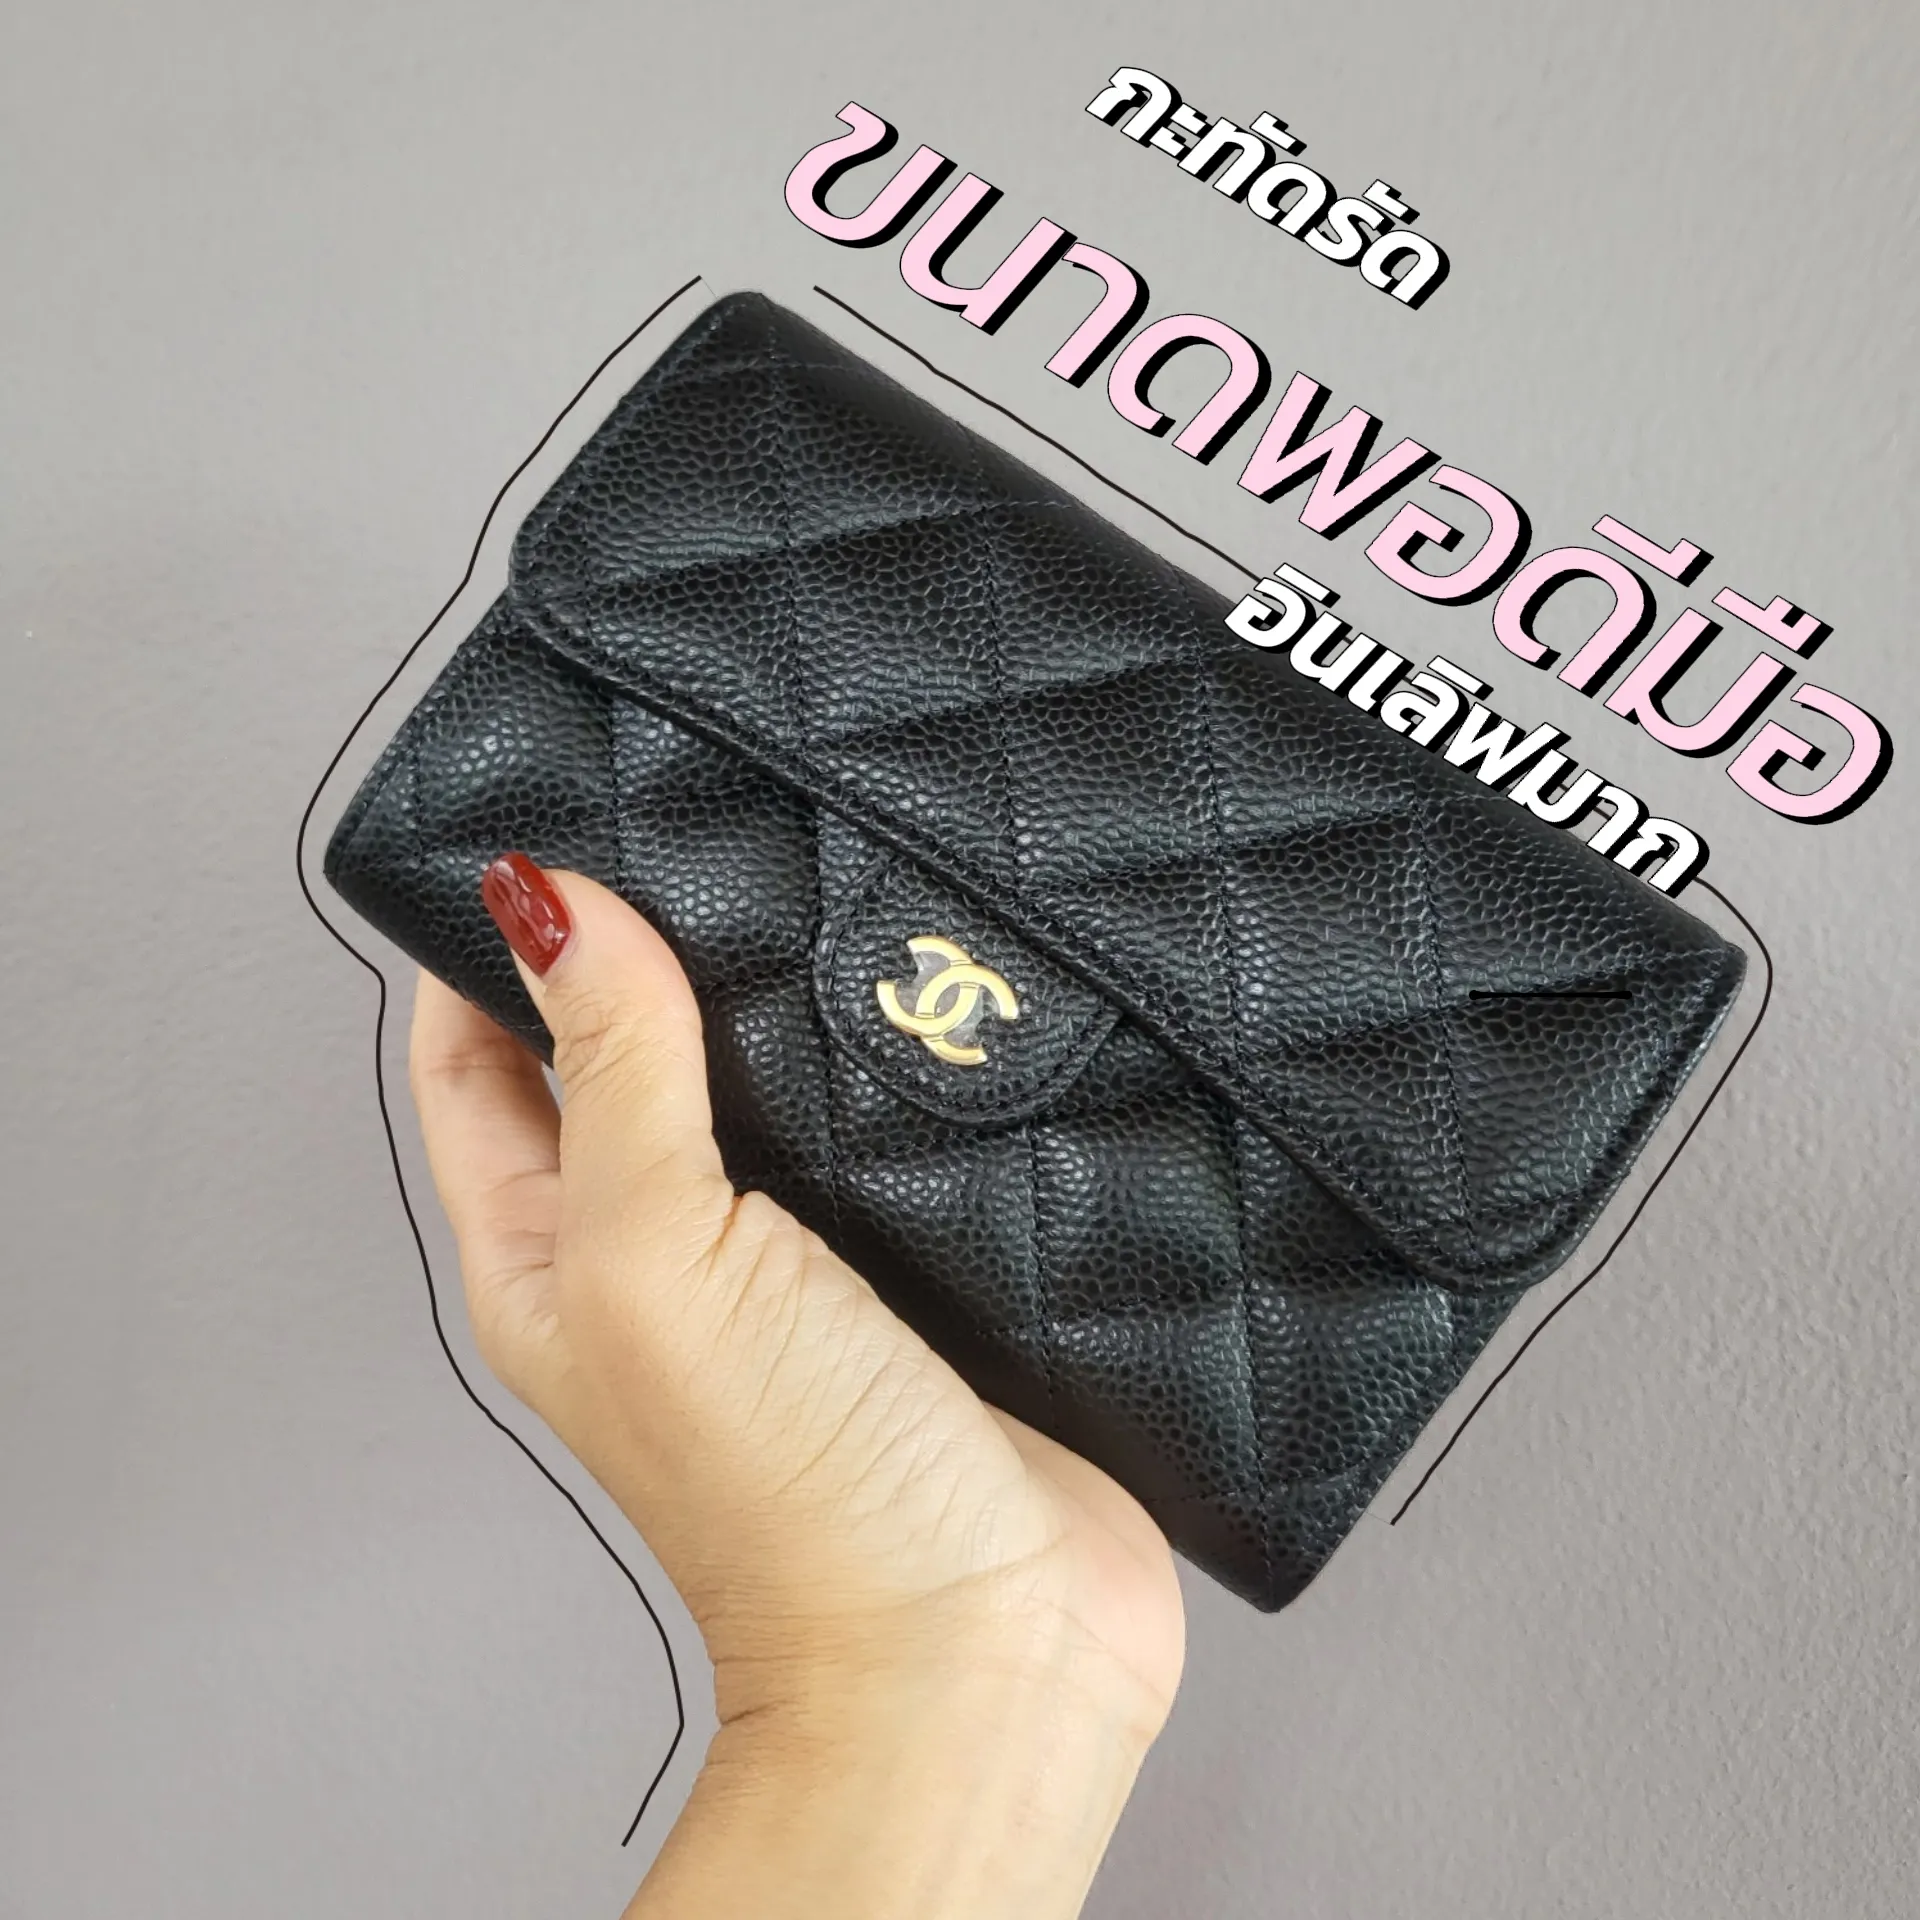 Review Chanel tri fold wallet 6 # Its Must Have